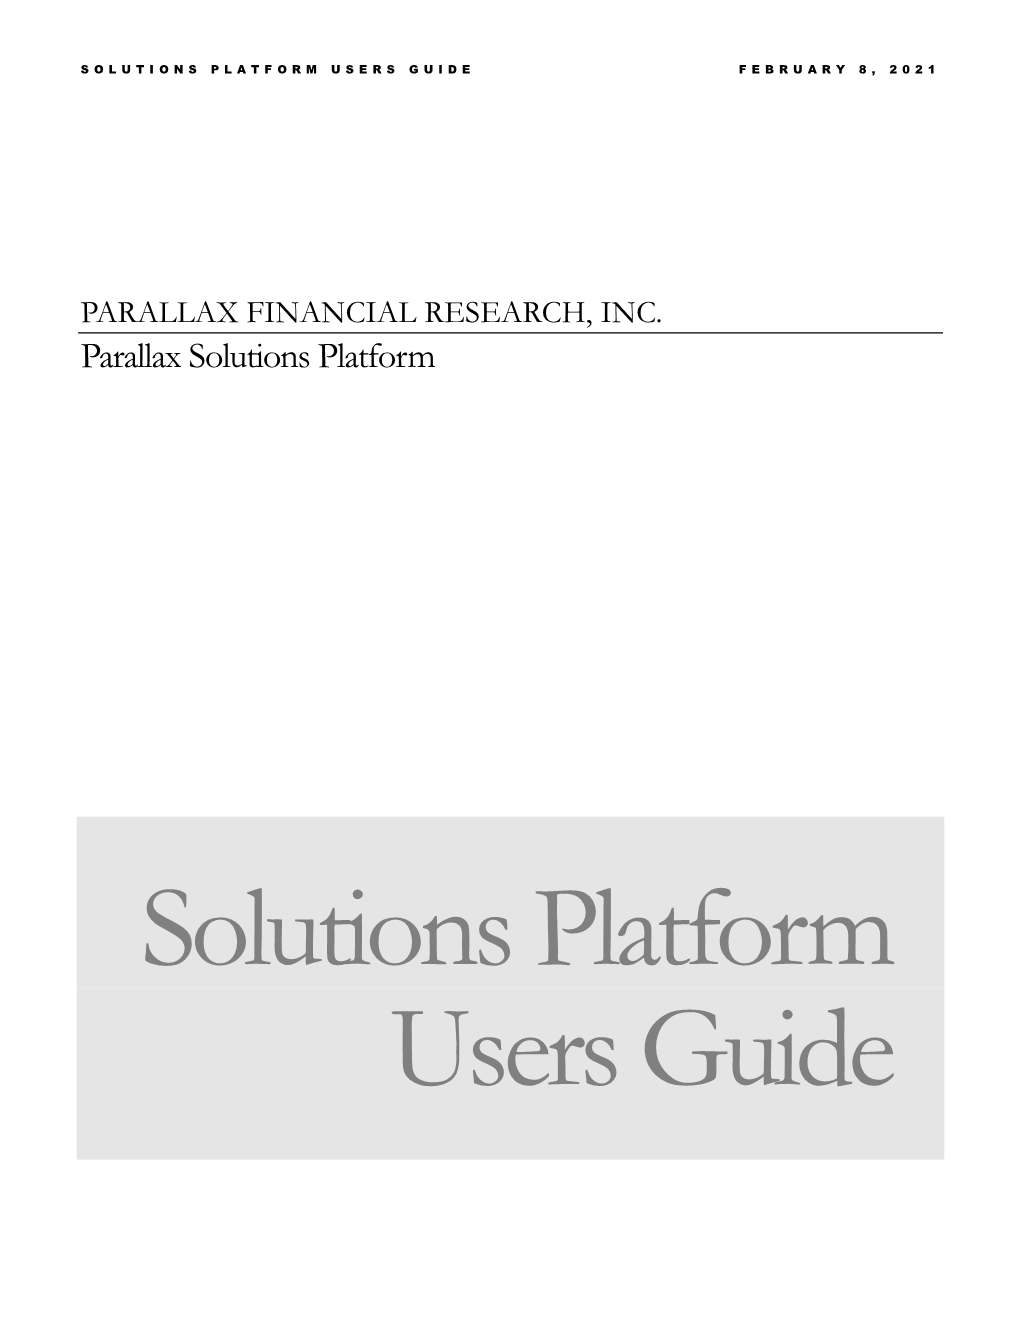 Parallax Solutions Platform Users Guide